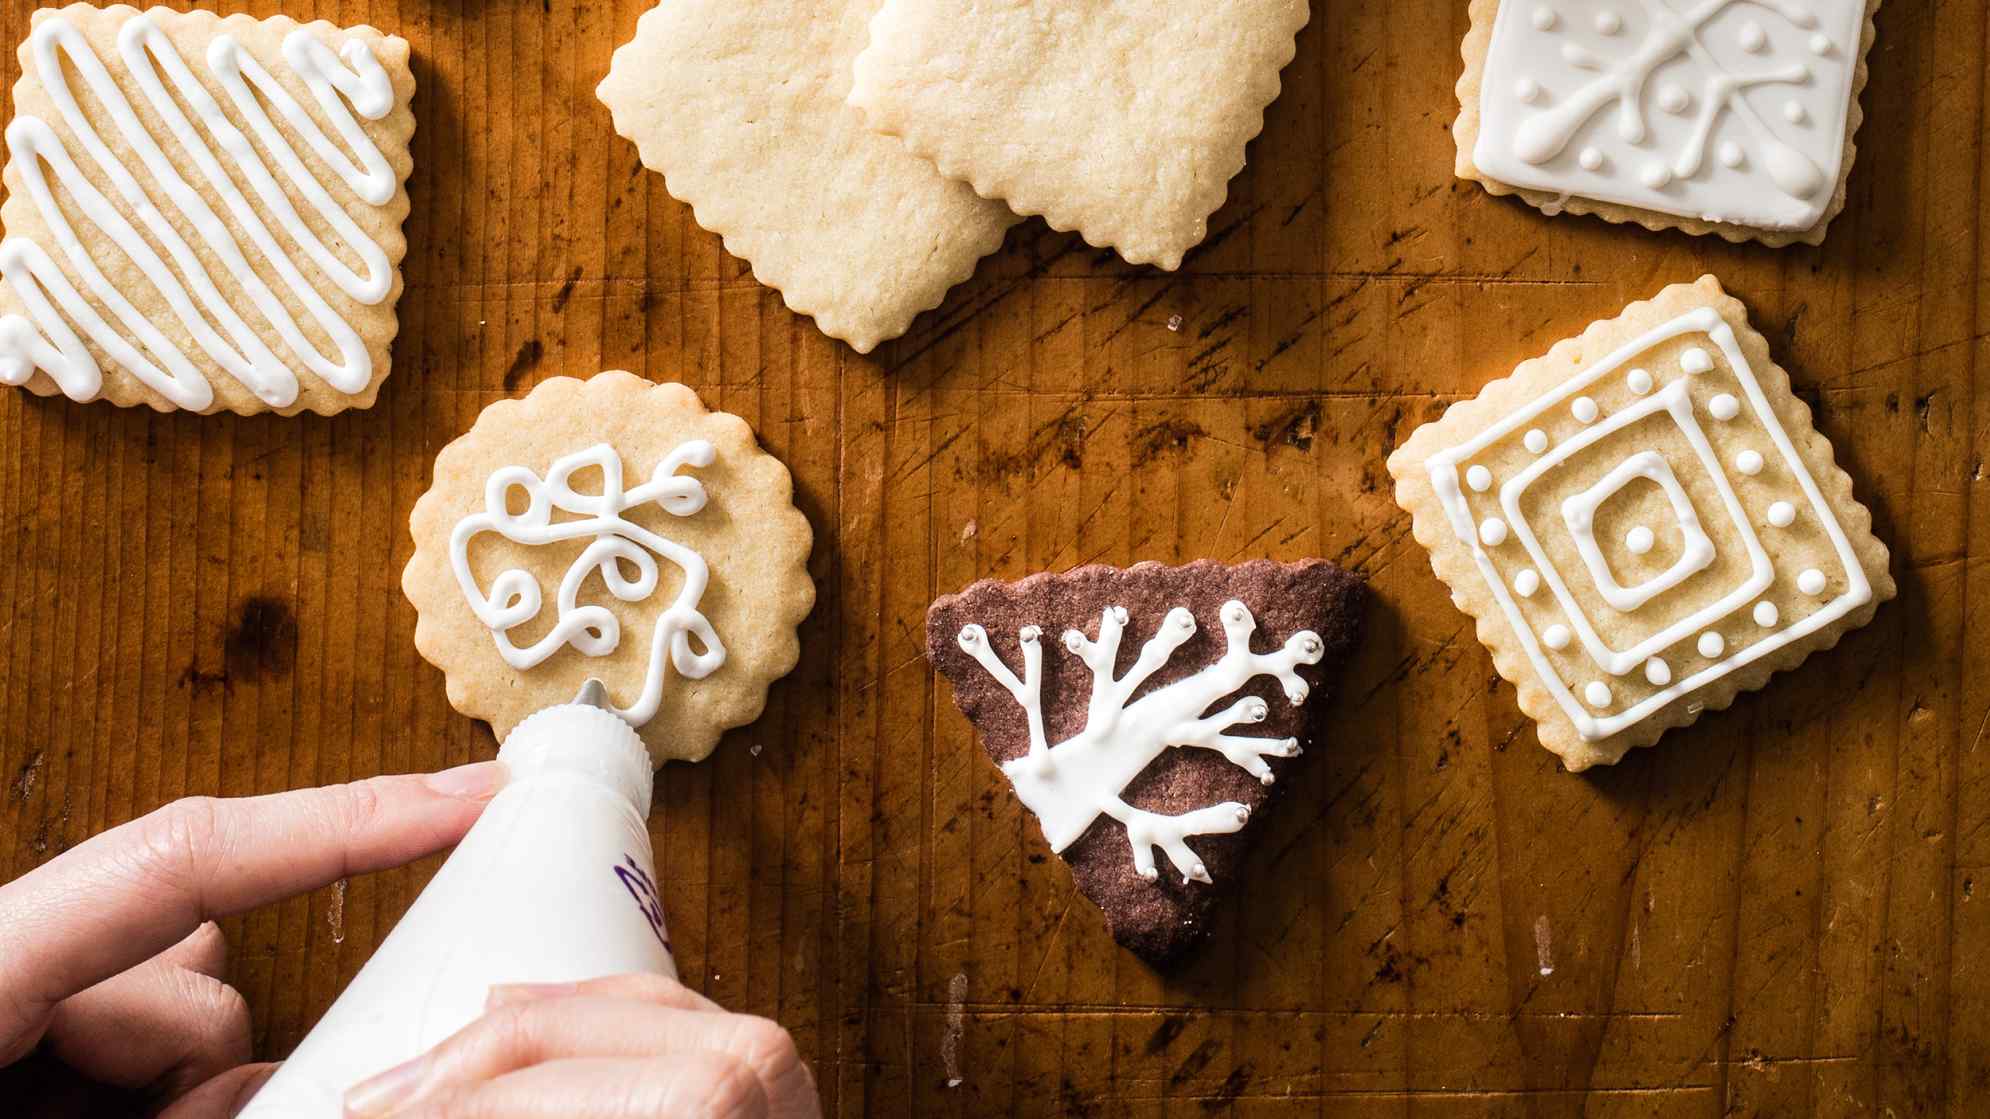 America's Test Kitchen Christmas Cookies - Our Favorite Holiday Cookies